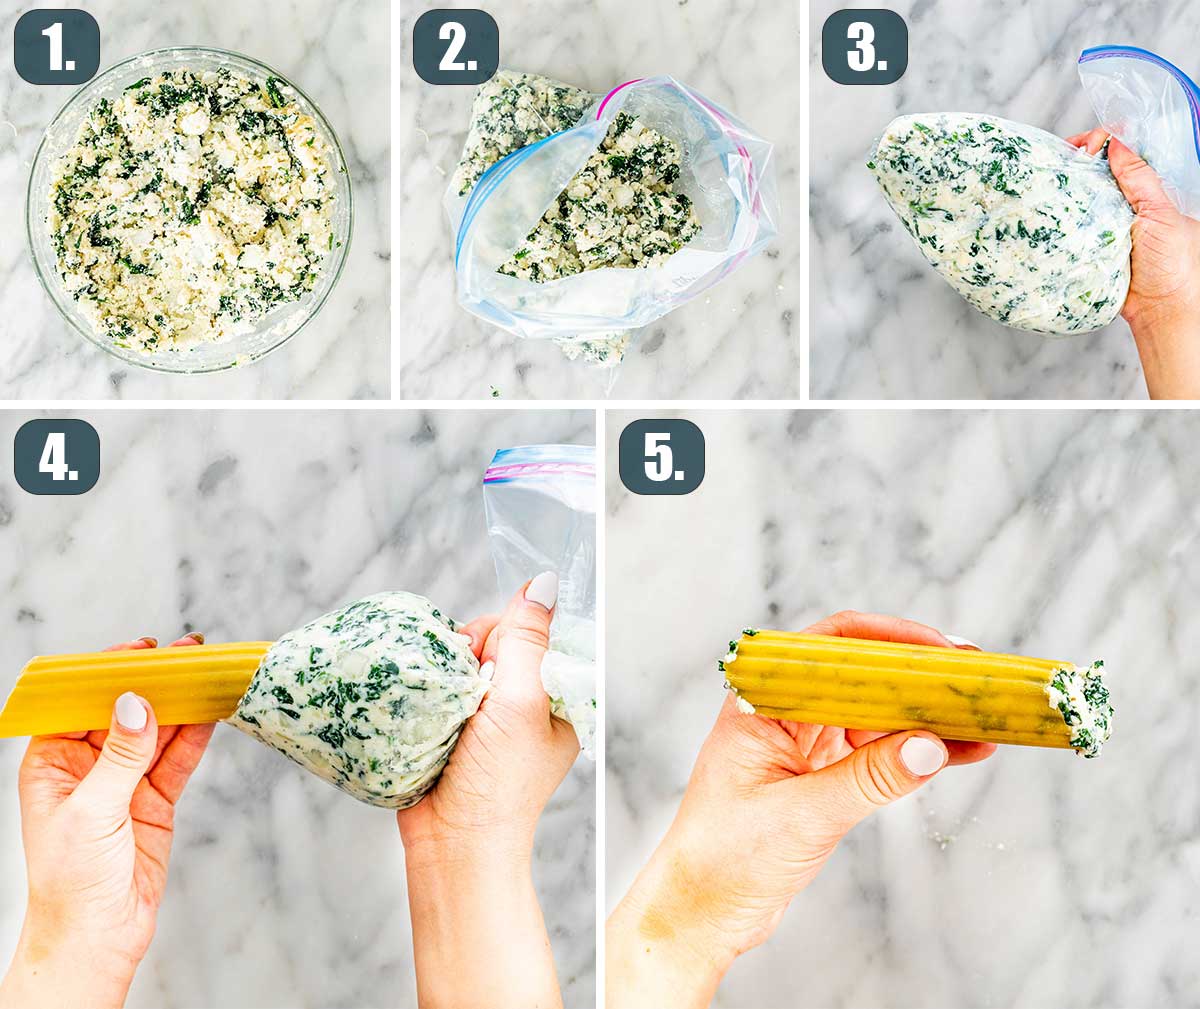 process shots showing how to make spinach ricotta mixture for stuffed manicotti.